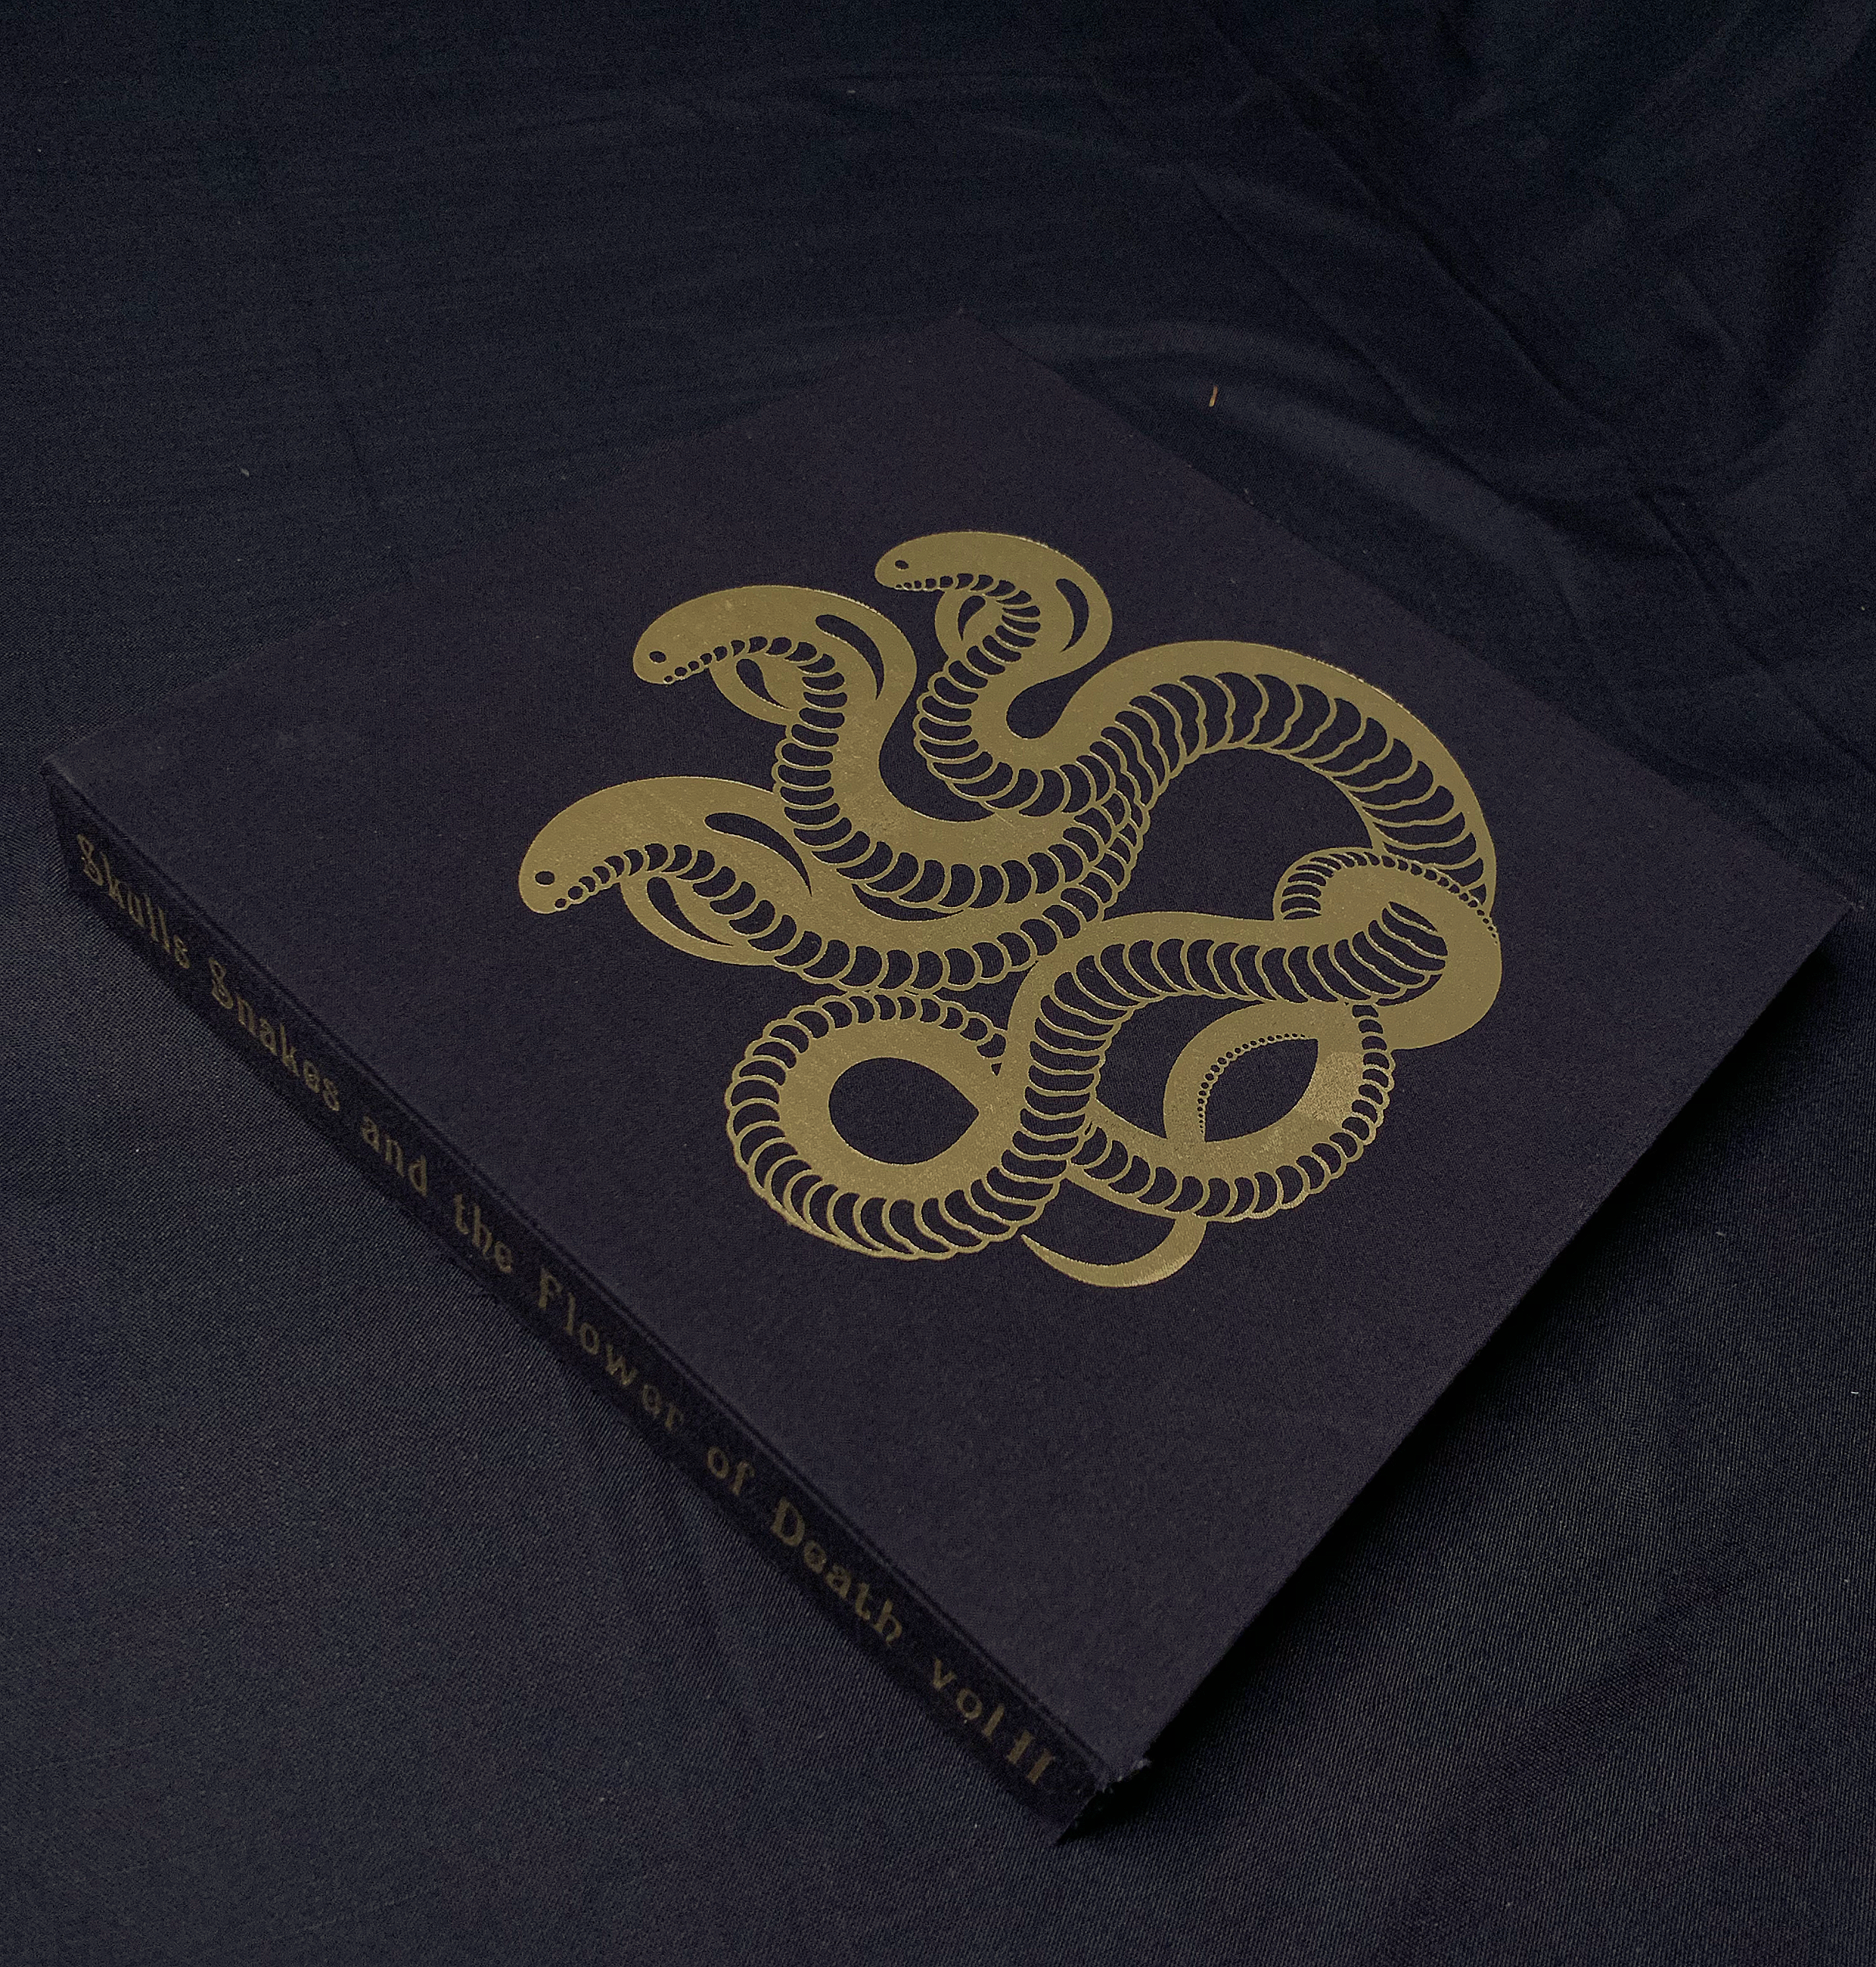 Book + Vinyl Clamshell Box Set: Skull Snakes and the Flower of Death 2